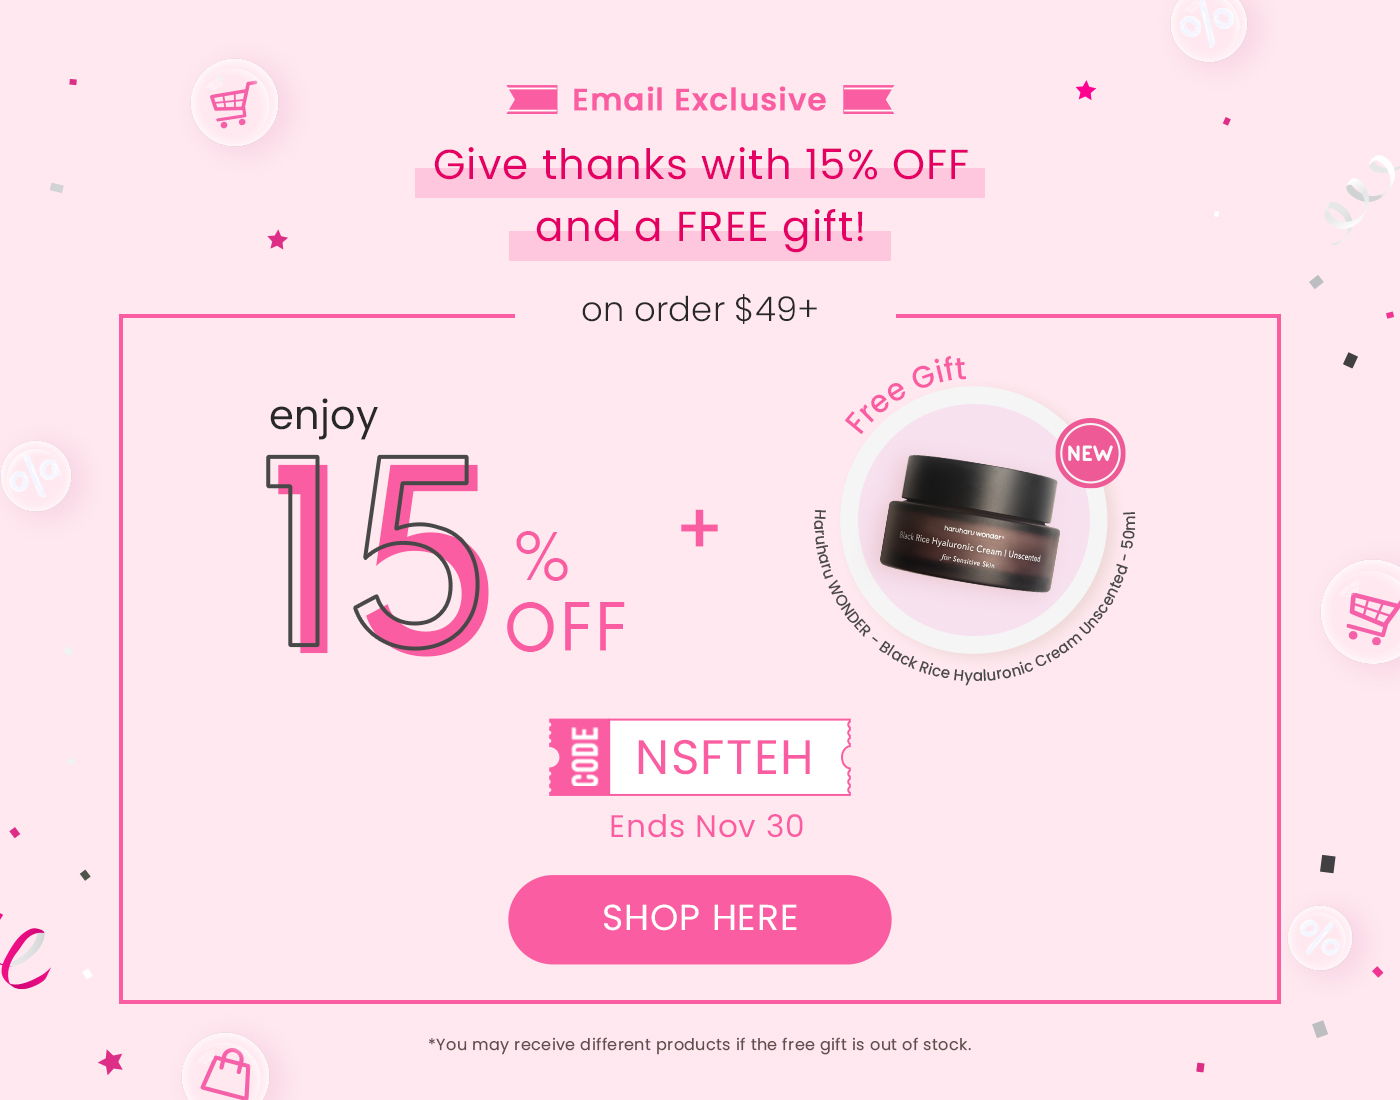  Ml Email Exclusive K Give thanks with 15% OFF and a FREE gift! on order $49 Ends Nov 30 SHOP HERE *You may receive different products if the free gift is out of stock. 